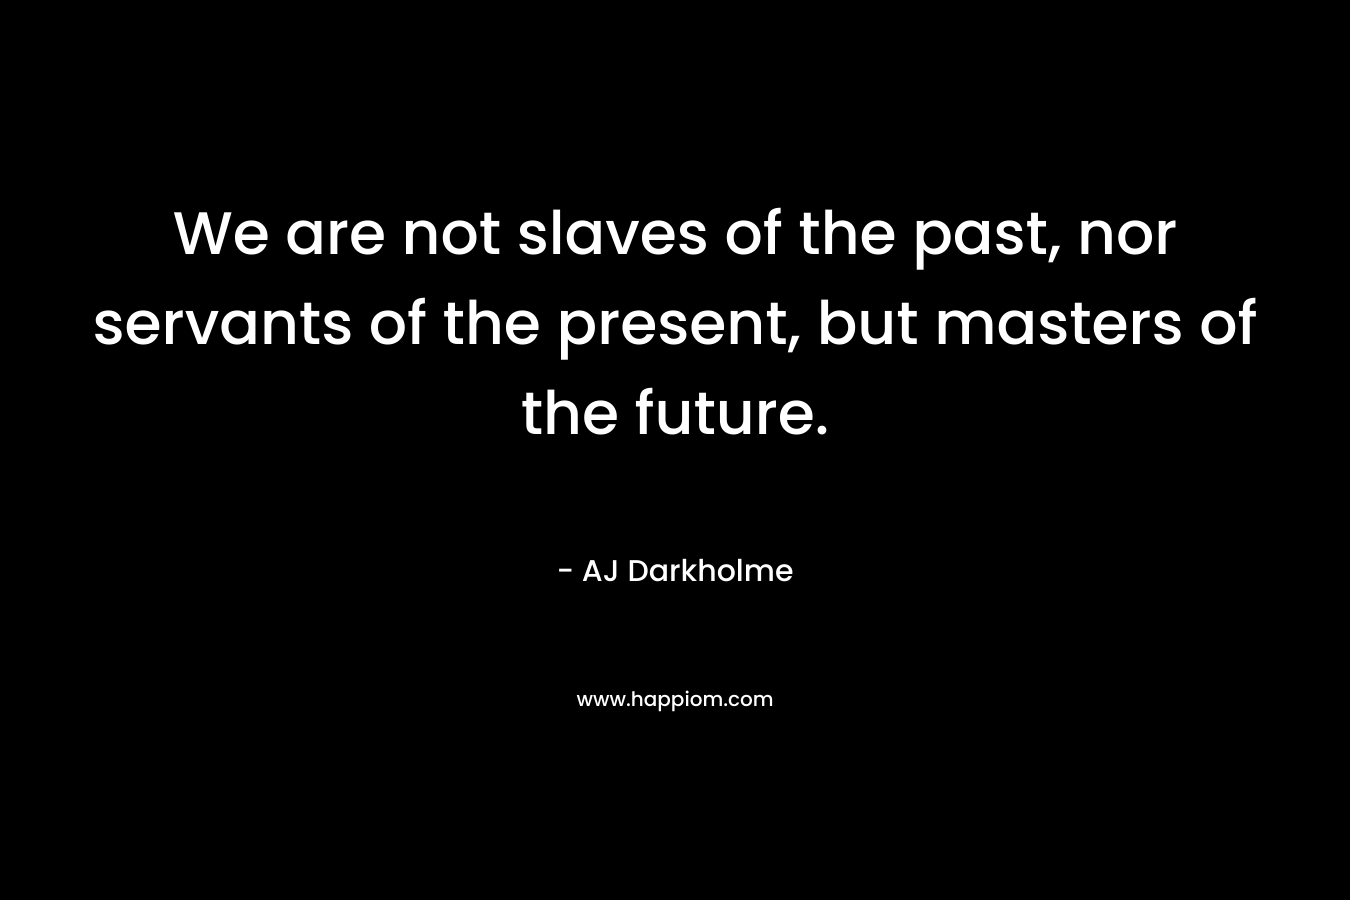 We are not slaves of the past, nor servants of the present, but masters of the future.